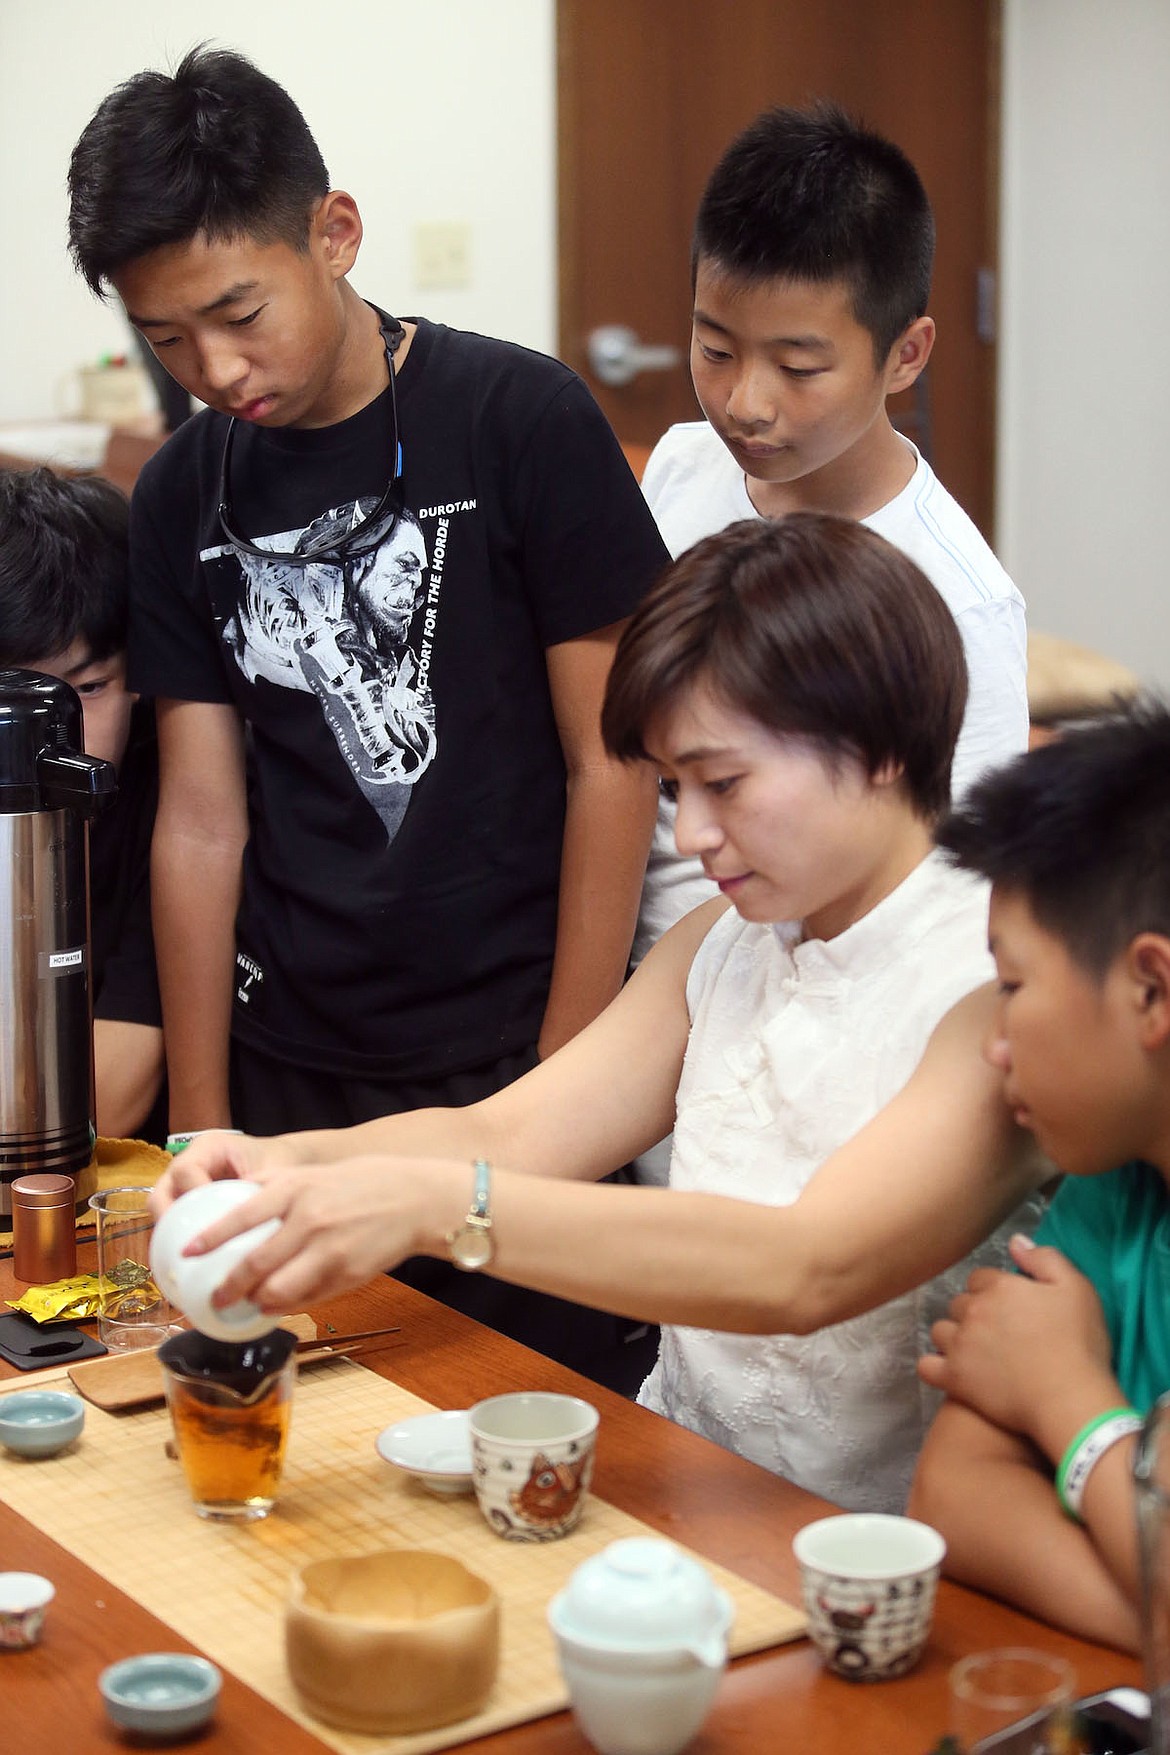 IDVenture founder Ying Xue pours tea while students from China prepare to serve their American friends during a traditional Chinese tea ceremony Thursday. (JUDD WILSON/Press)